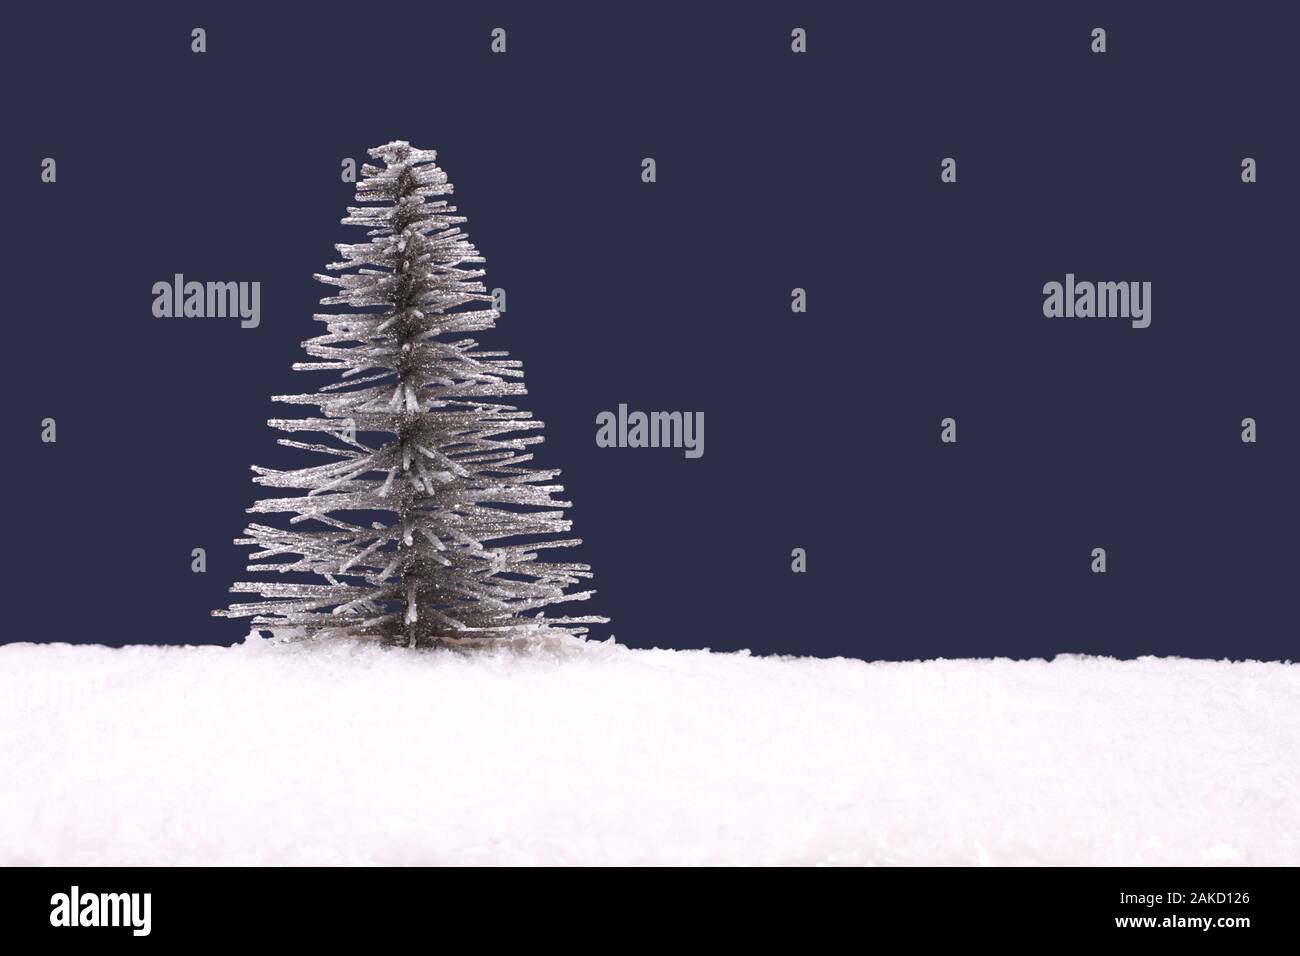 Toy silver Christmas tree on artificial white snow against navy blue background Stock Photo